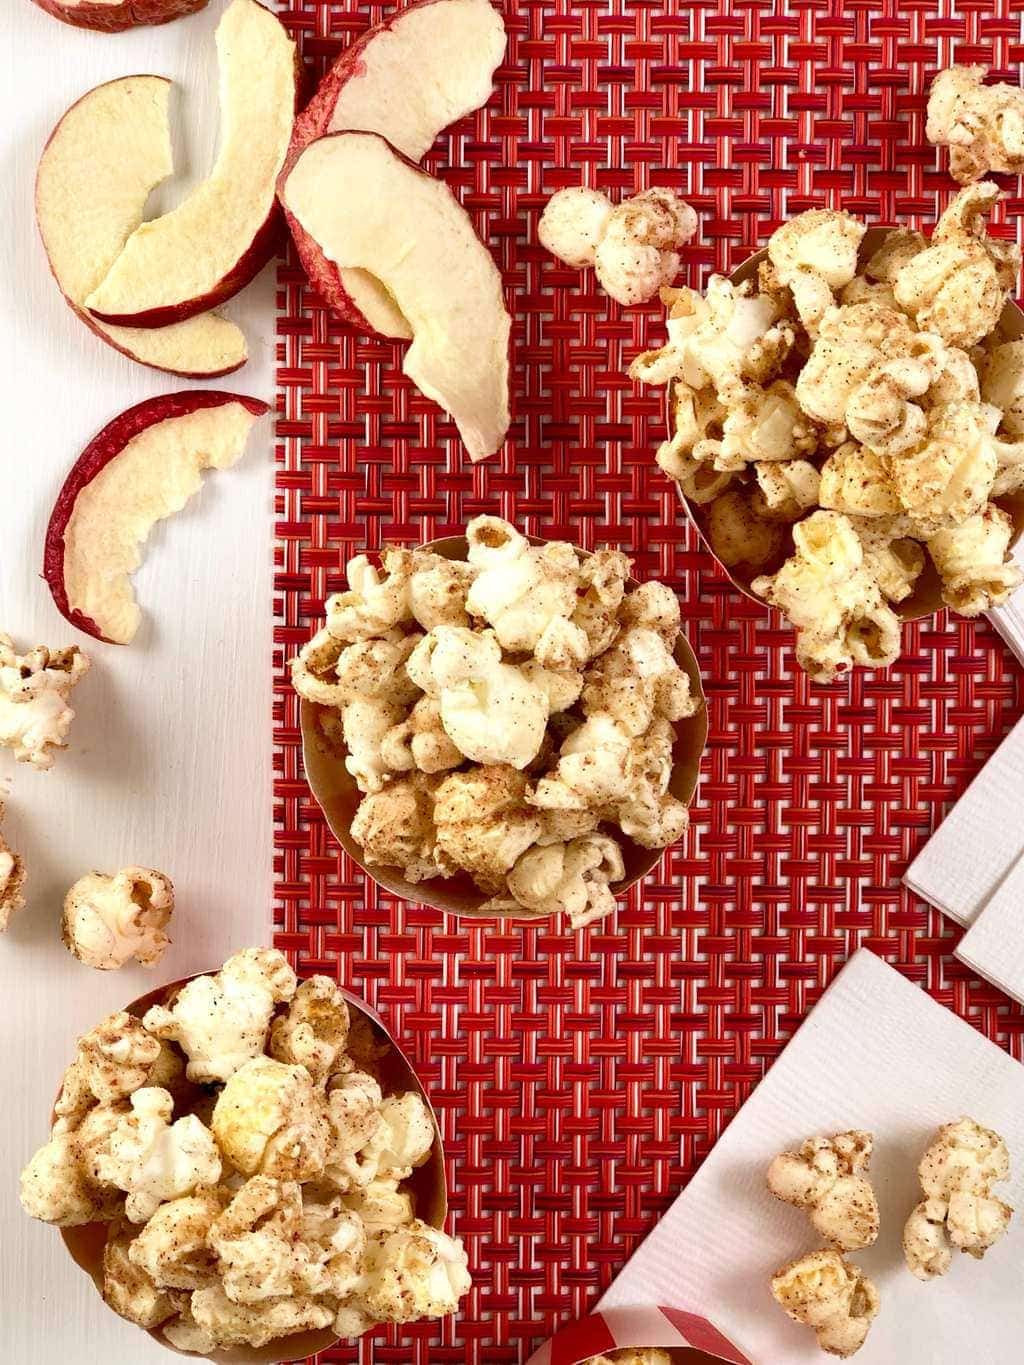 Apple cinnamon popcorn in red and white cups overhead